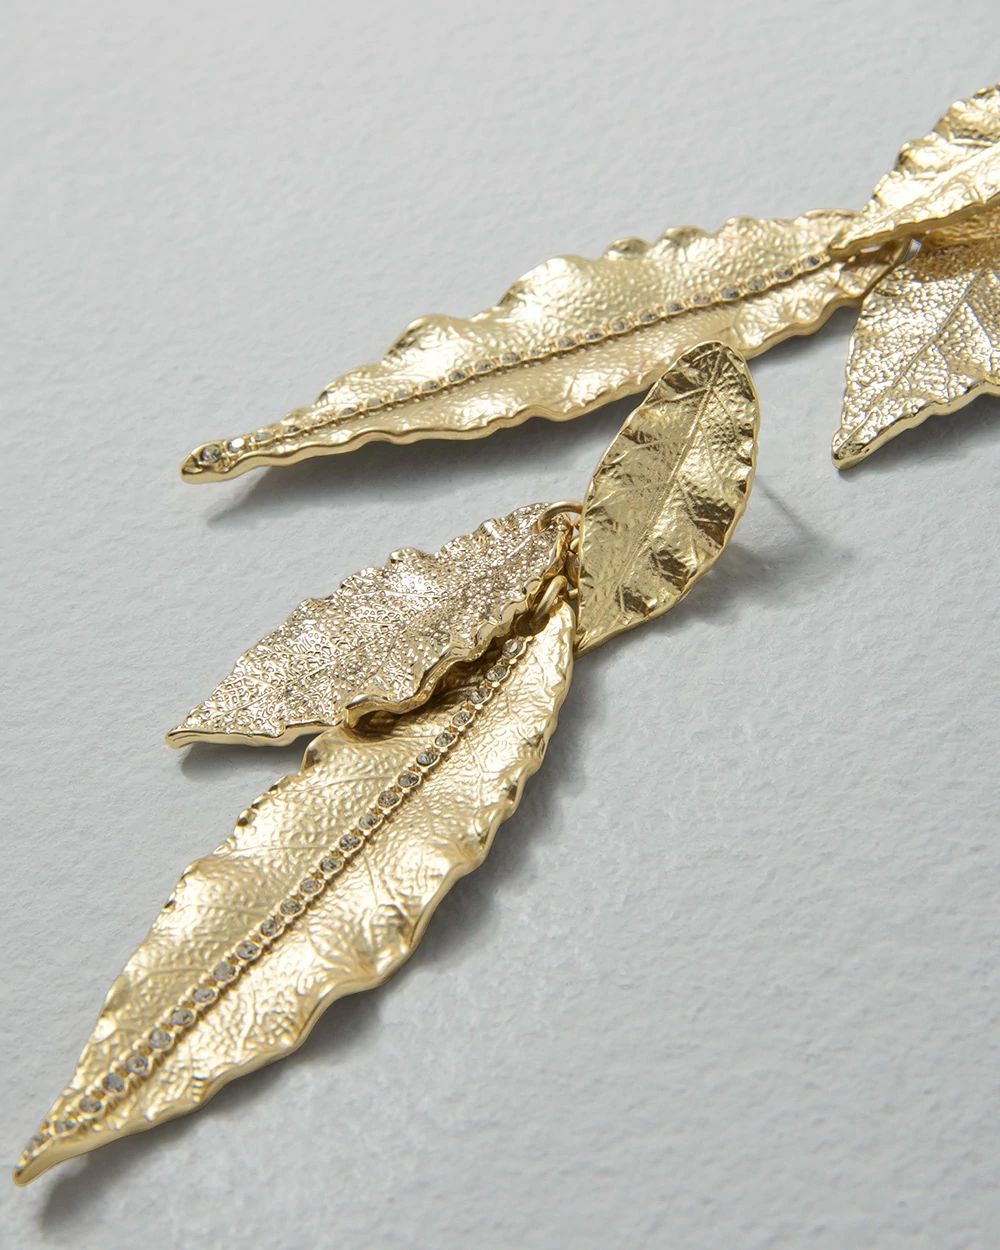 Goldtone Linear Leaf Earrings click to view larger image.